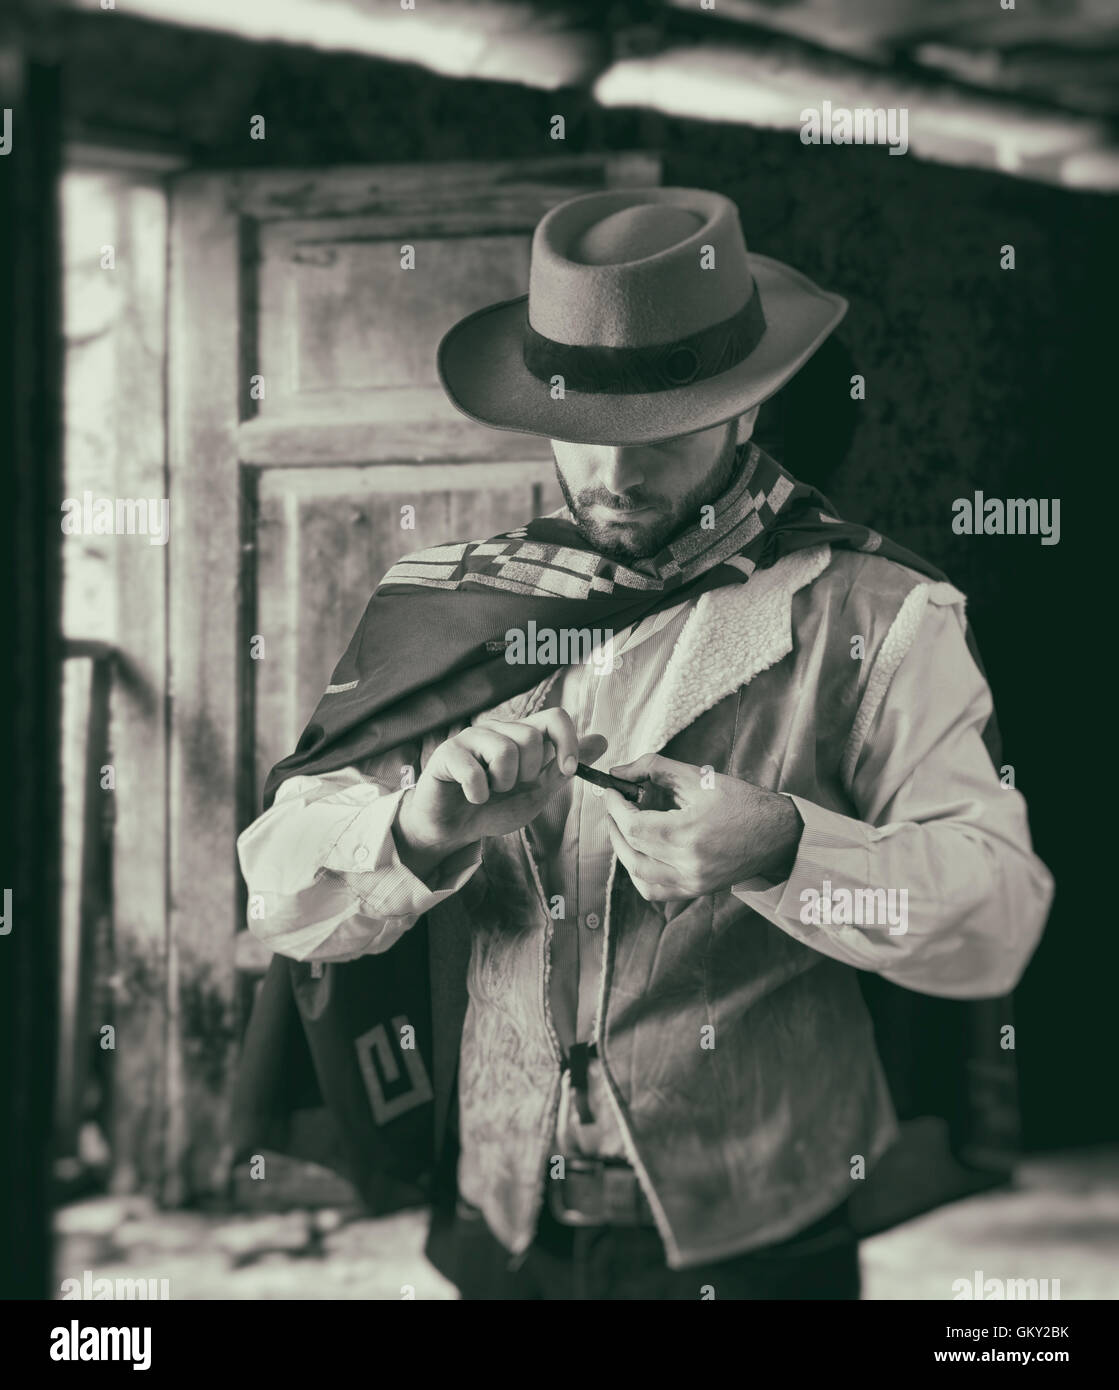 Gunfighter of the wild west while scrolling tobacco. Black and white image. Stock Photo